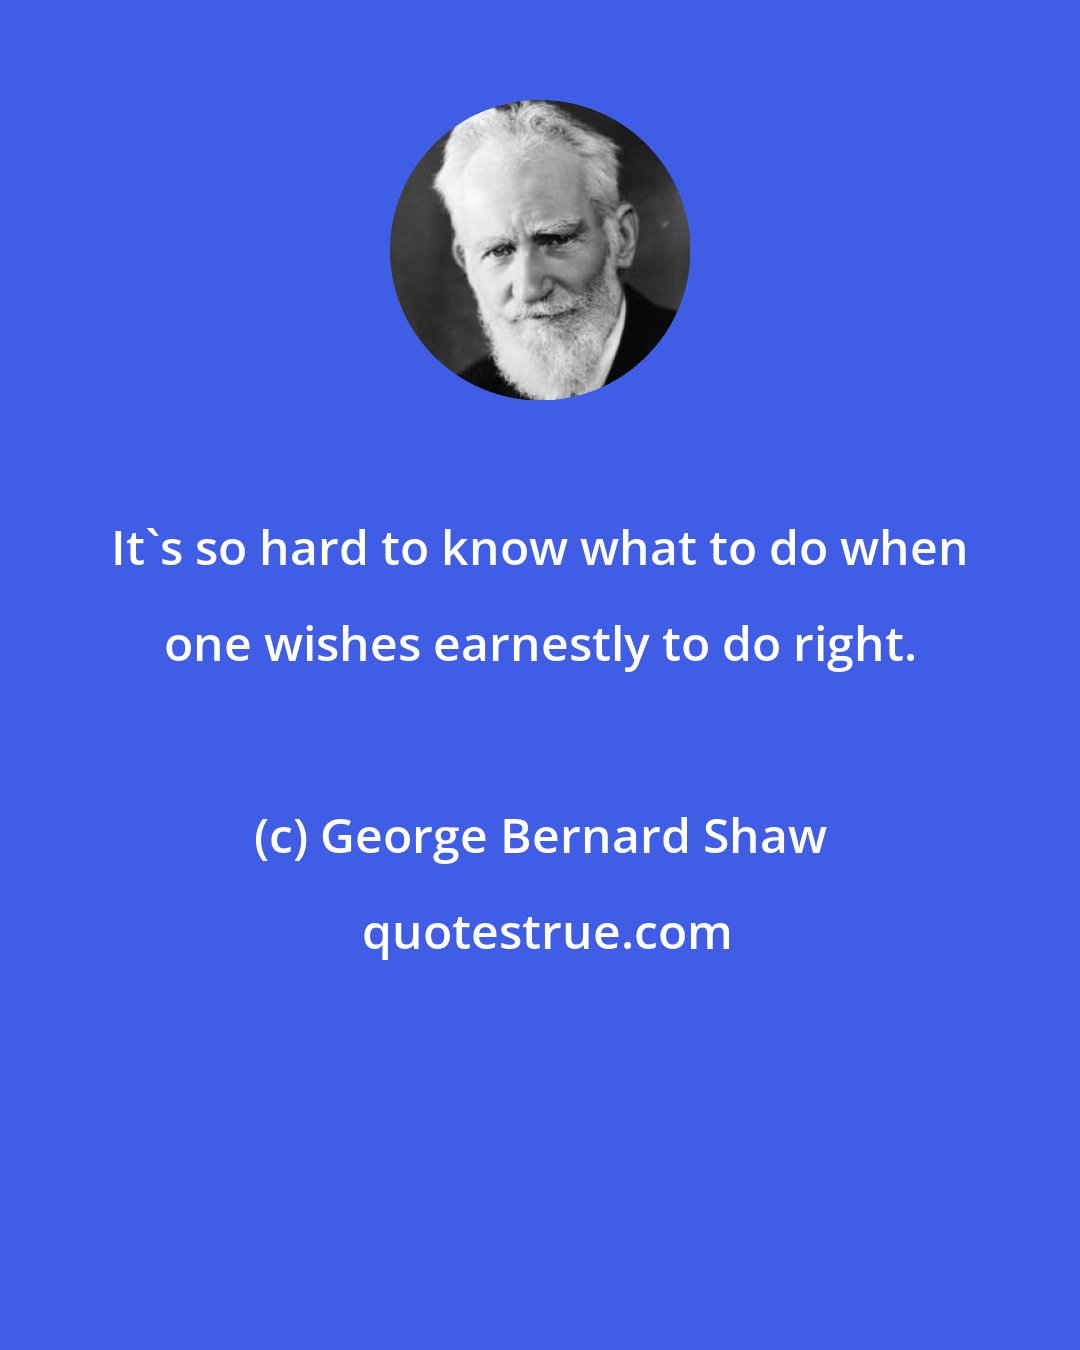 George Bernard Shaw: It's so hard to know what to do when one wishes earnestly to do right.